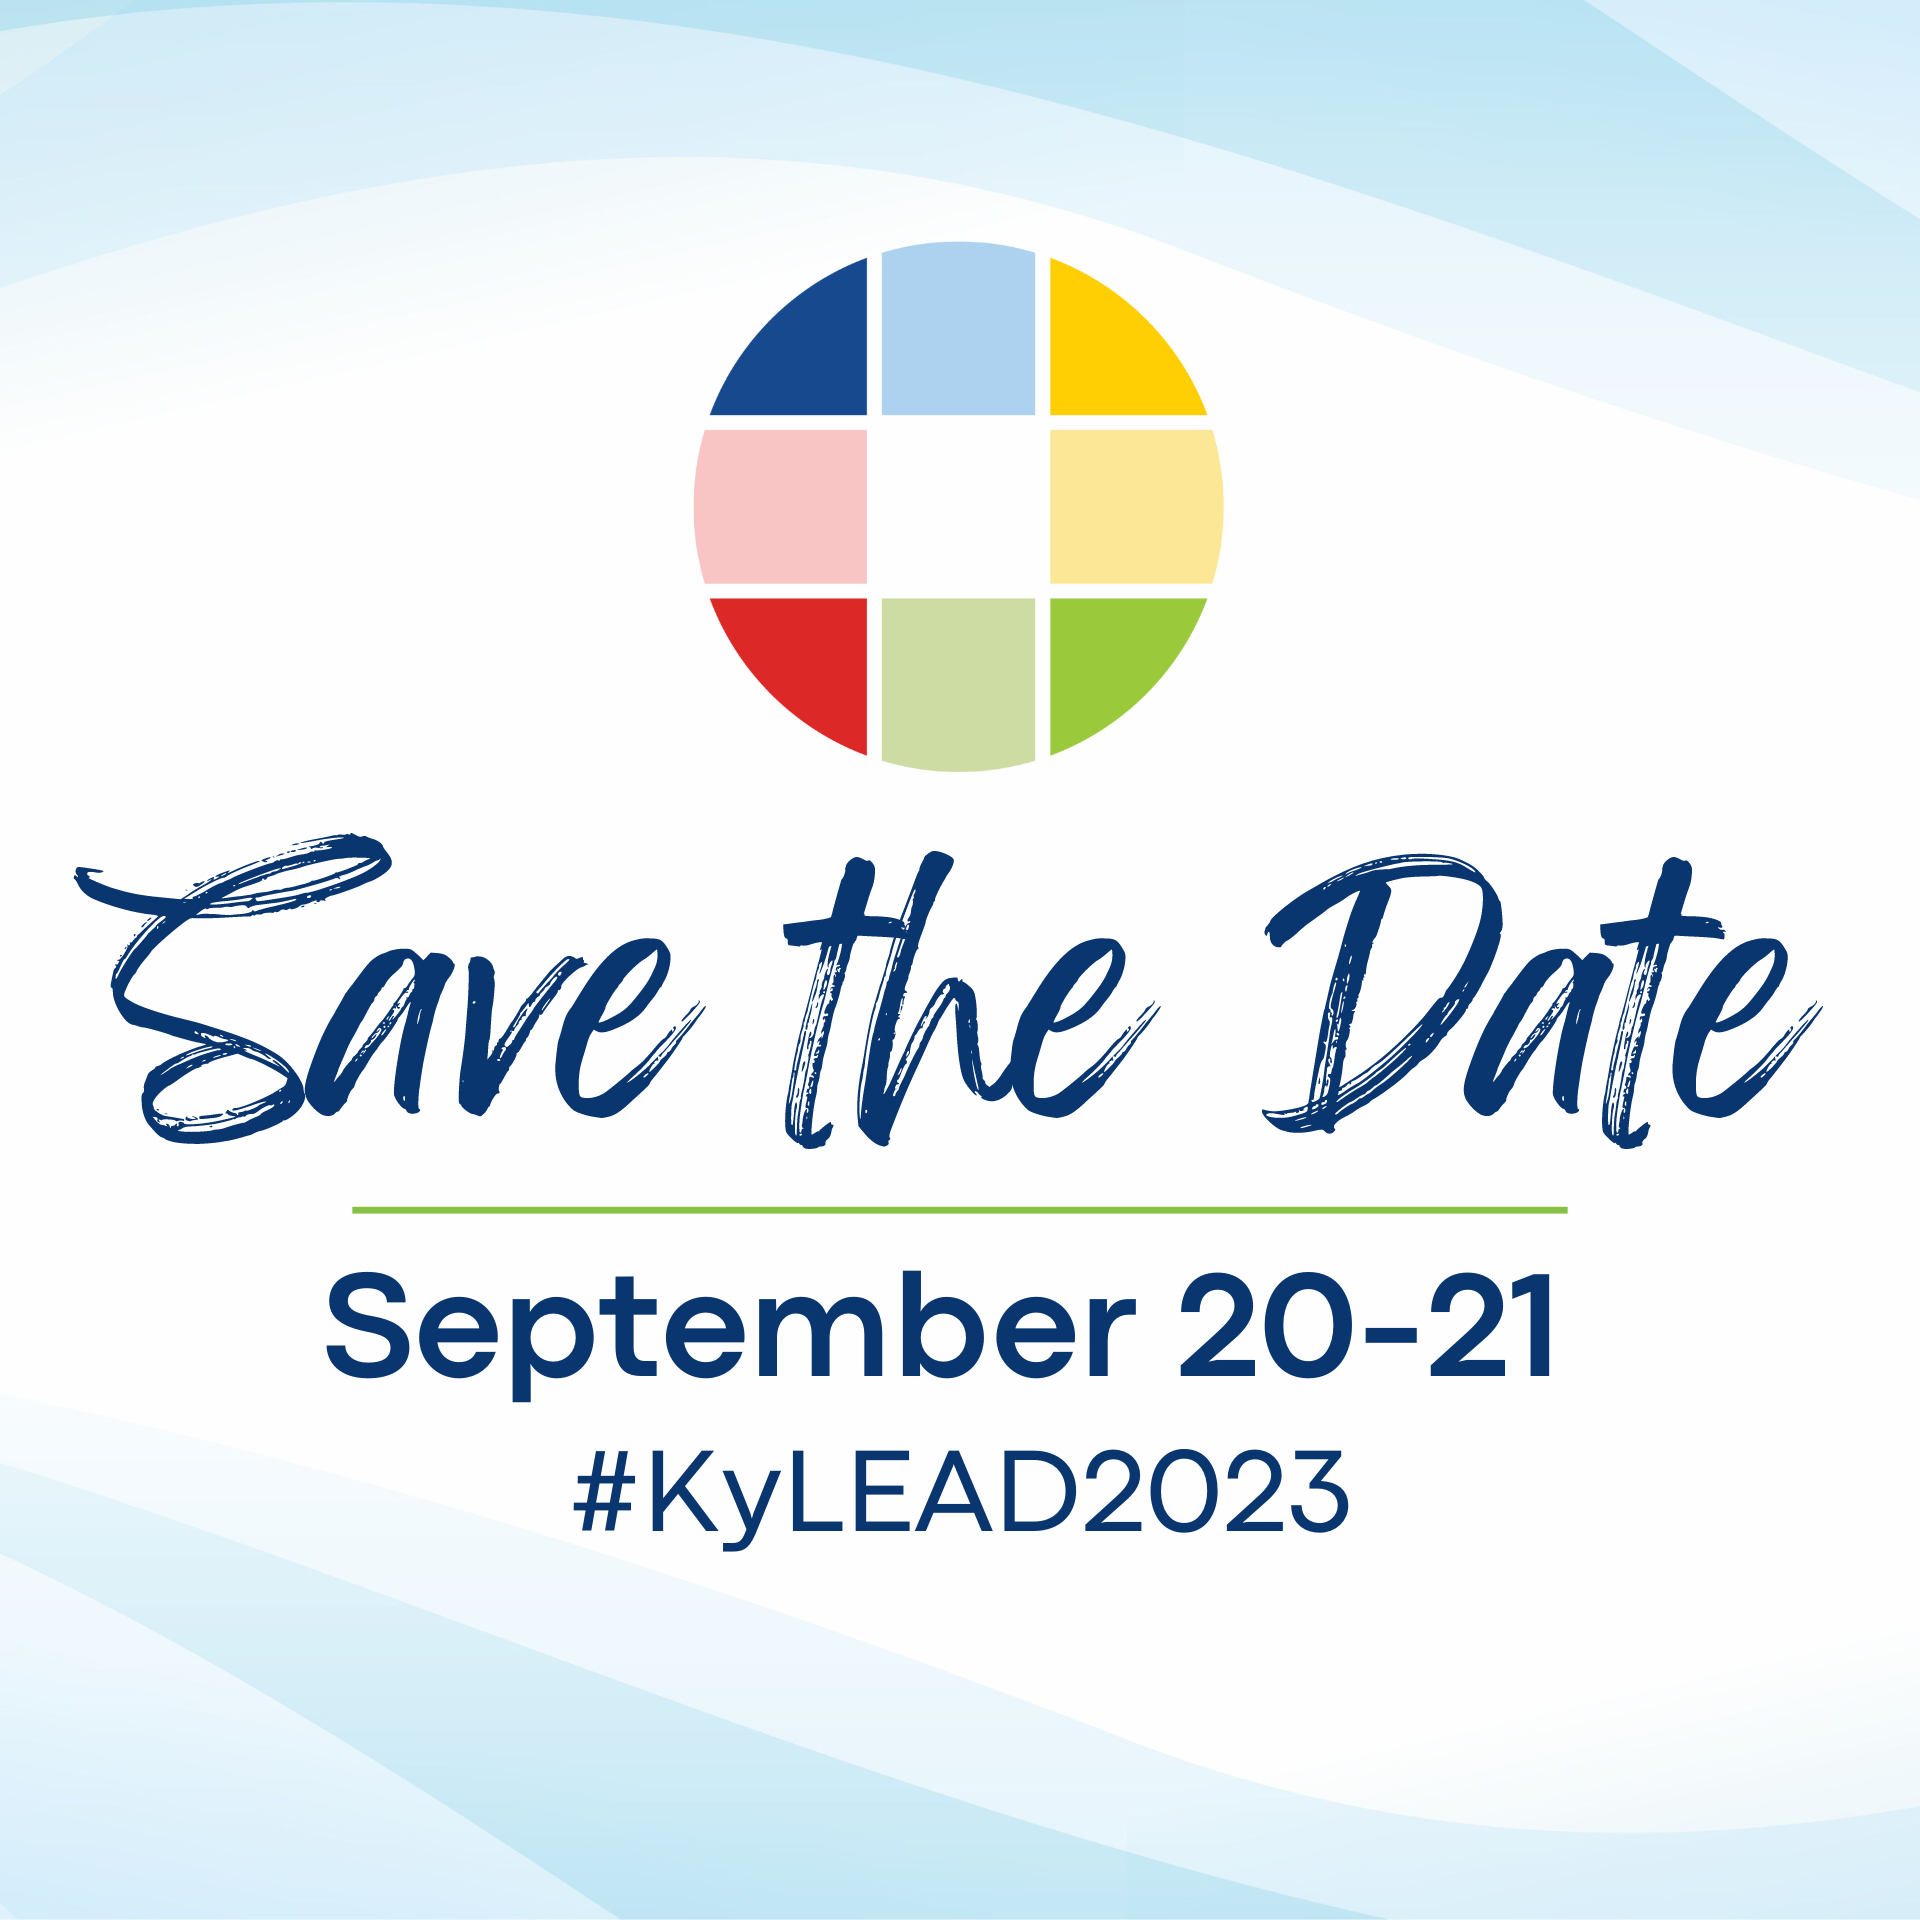 Save the Date, September 20-21, #KyLEAD2023